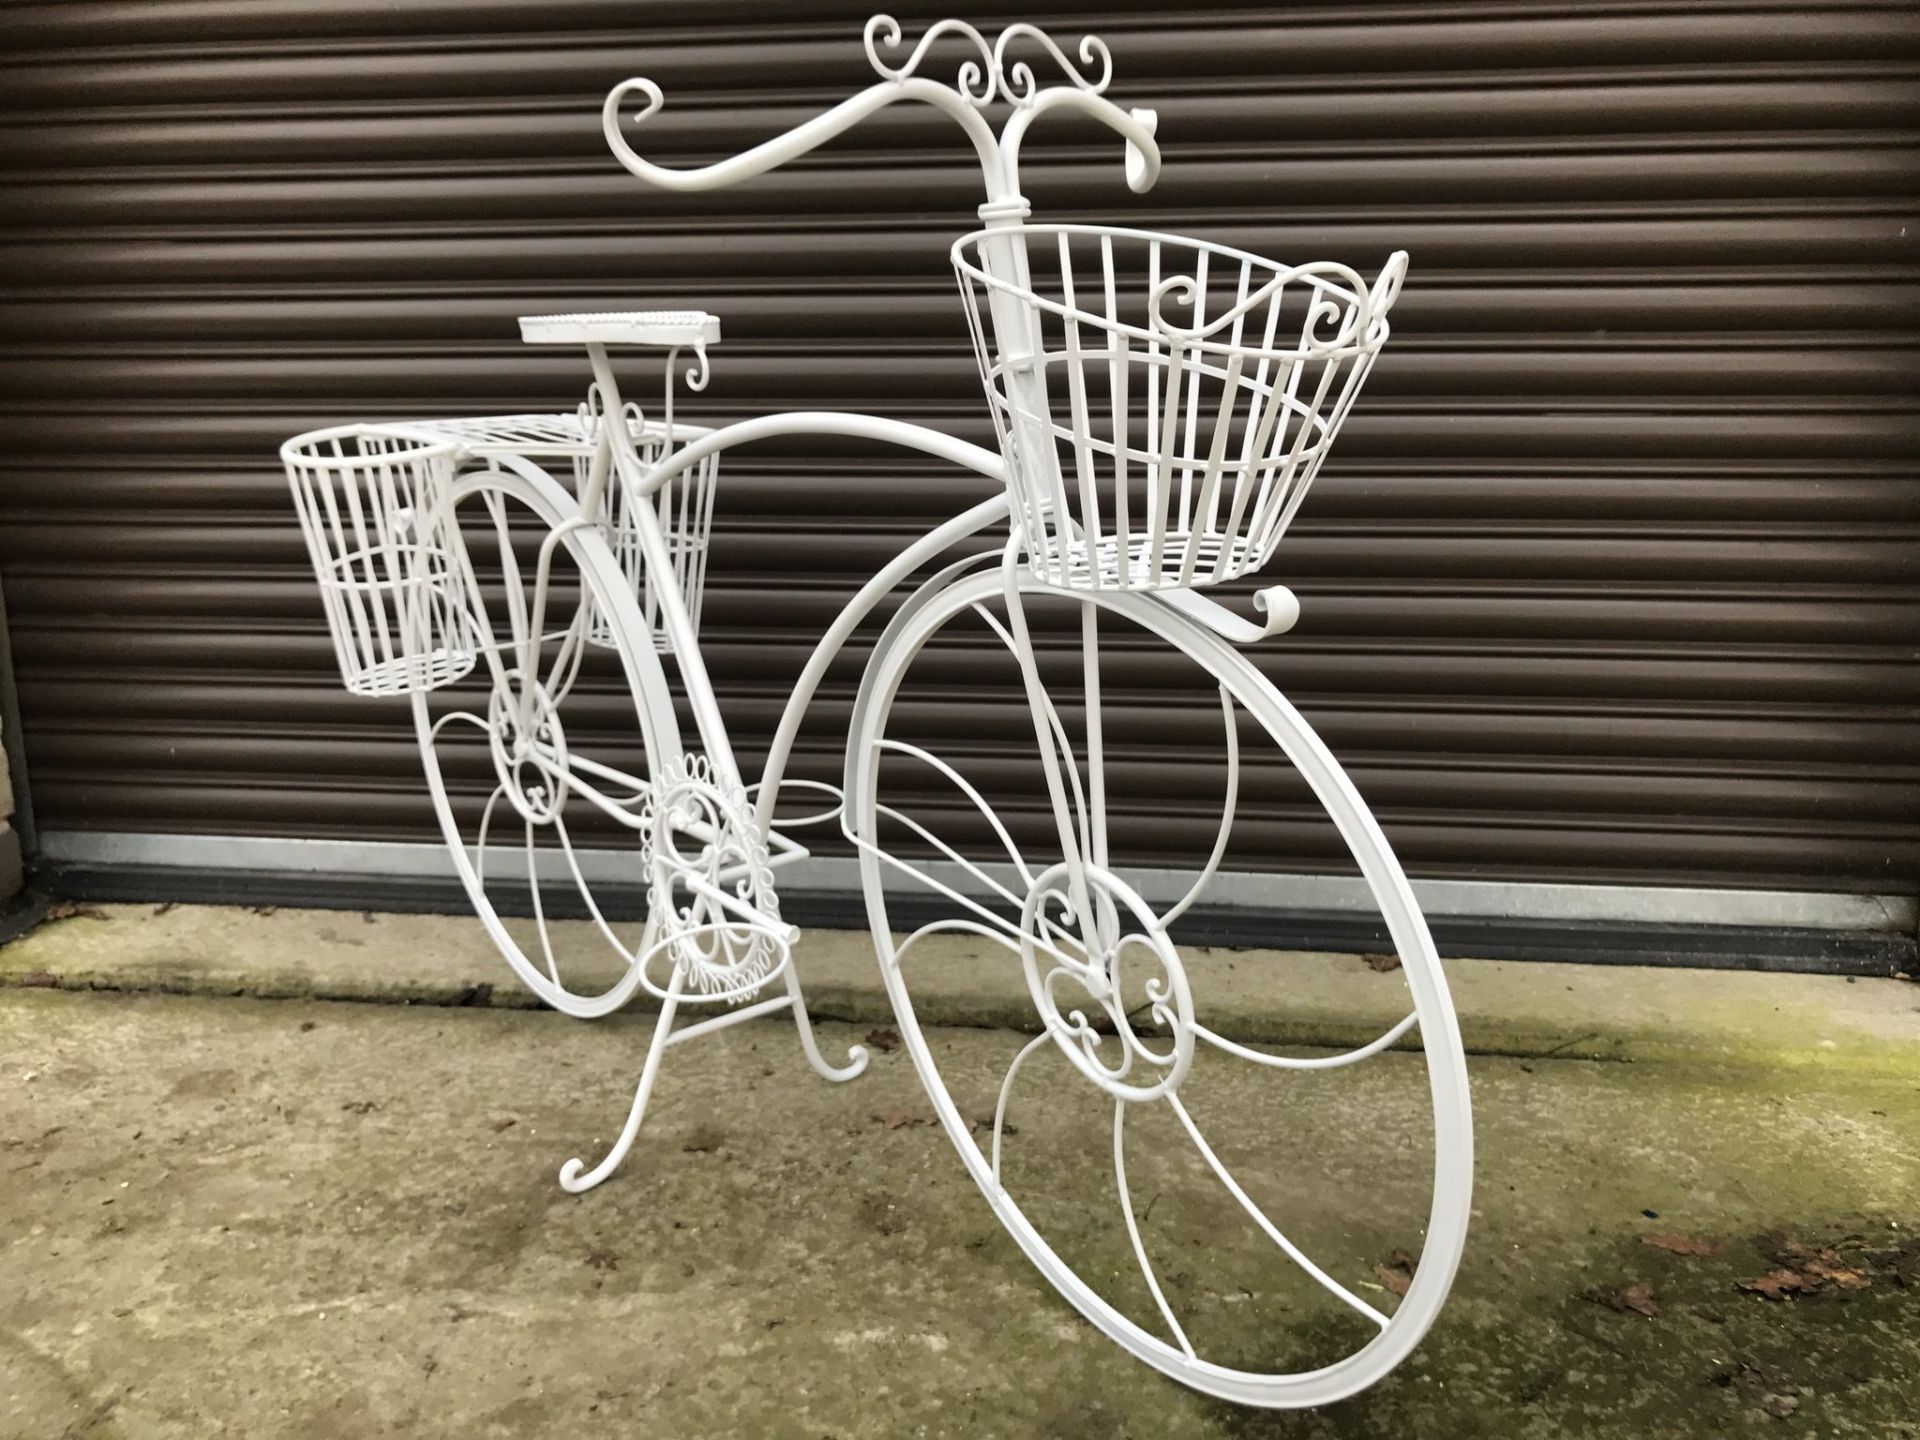 BOXED NEW ORNATE WHITE BICYCLE PLANTER